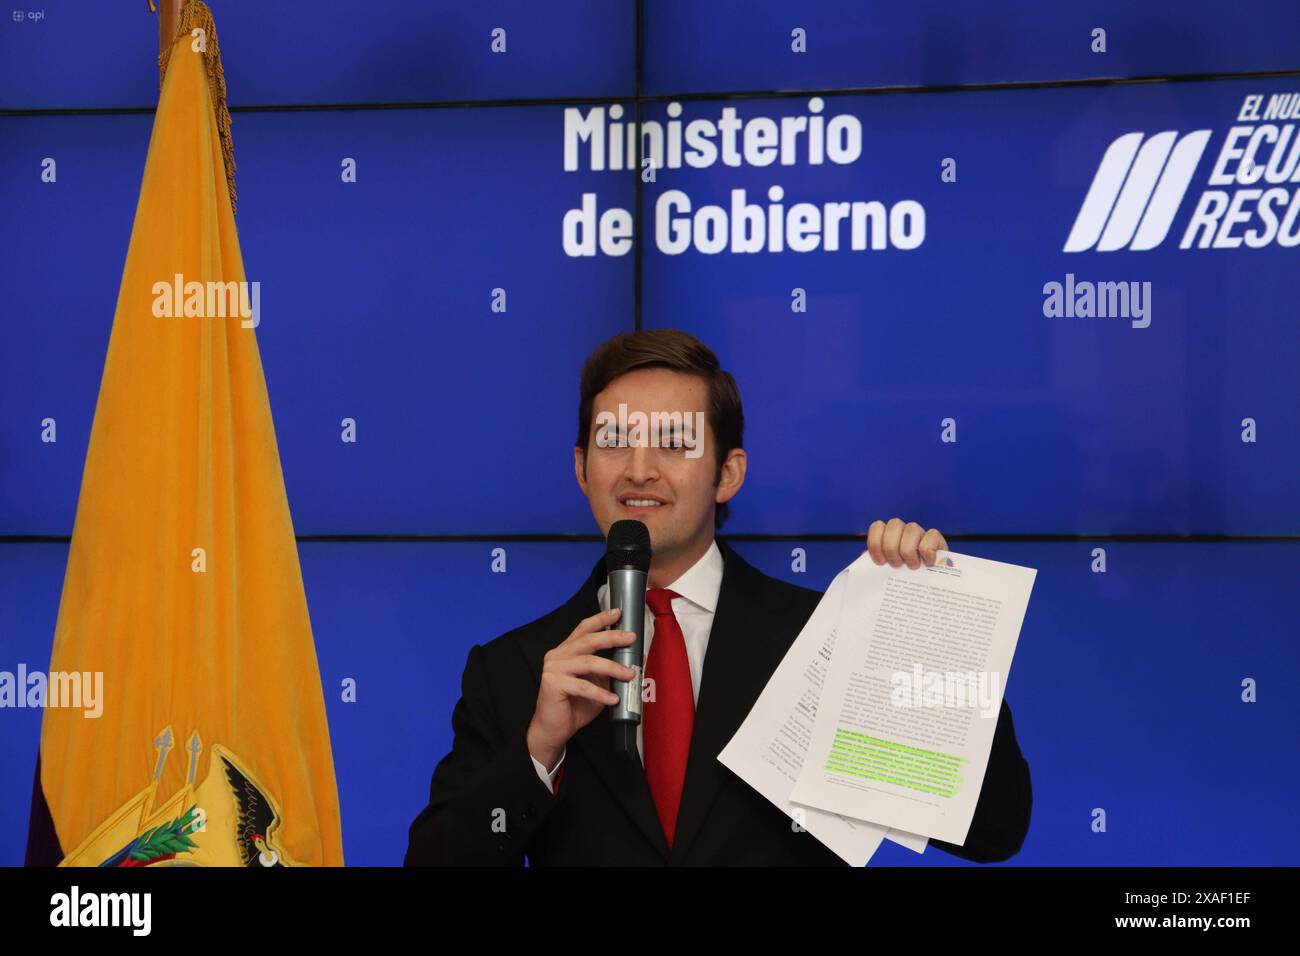 ESTEBAN TORRES Quito, Thursday, June 6, 2024 Deputy Minister of Government Esteban Torres, at a press conference at the Ministry of Government, on political issues with the Assembly Photos Quito Pichincha Ecuador POL ESTEBAN TORRES 7ee9a328de8d862010101b88c3d1a12377 Copyright: xROLANDOxENRIQUEZx Stock Photo